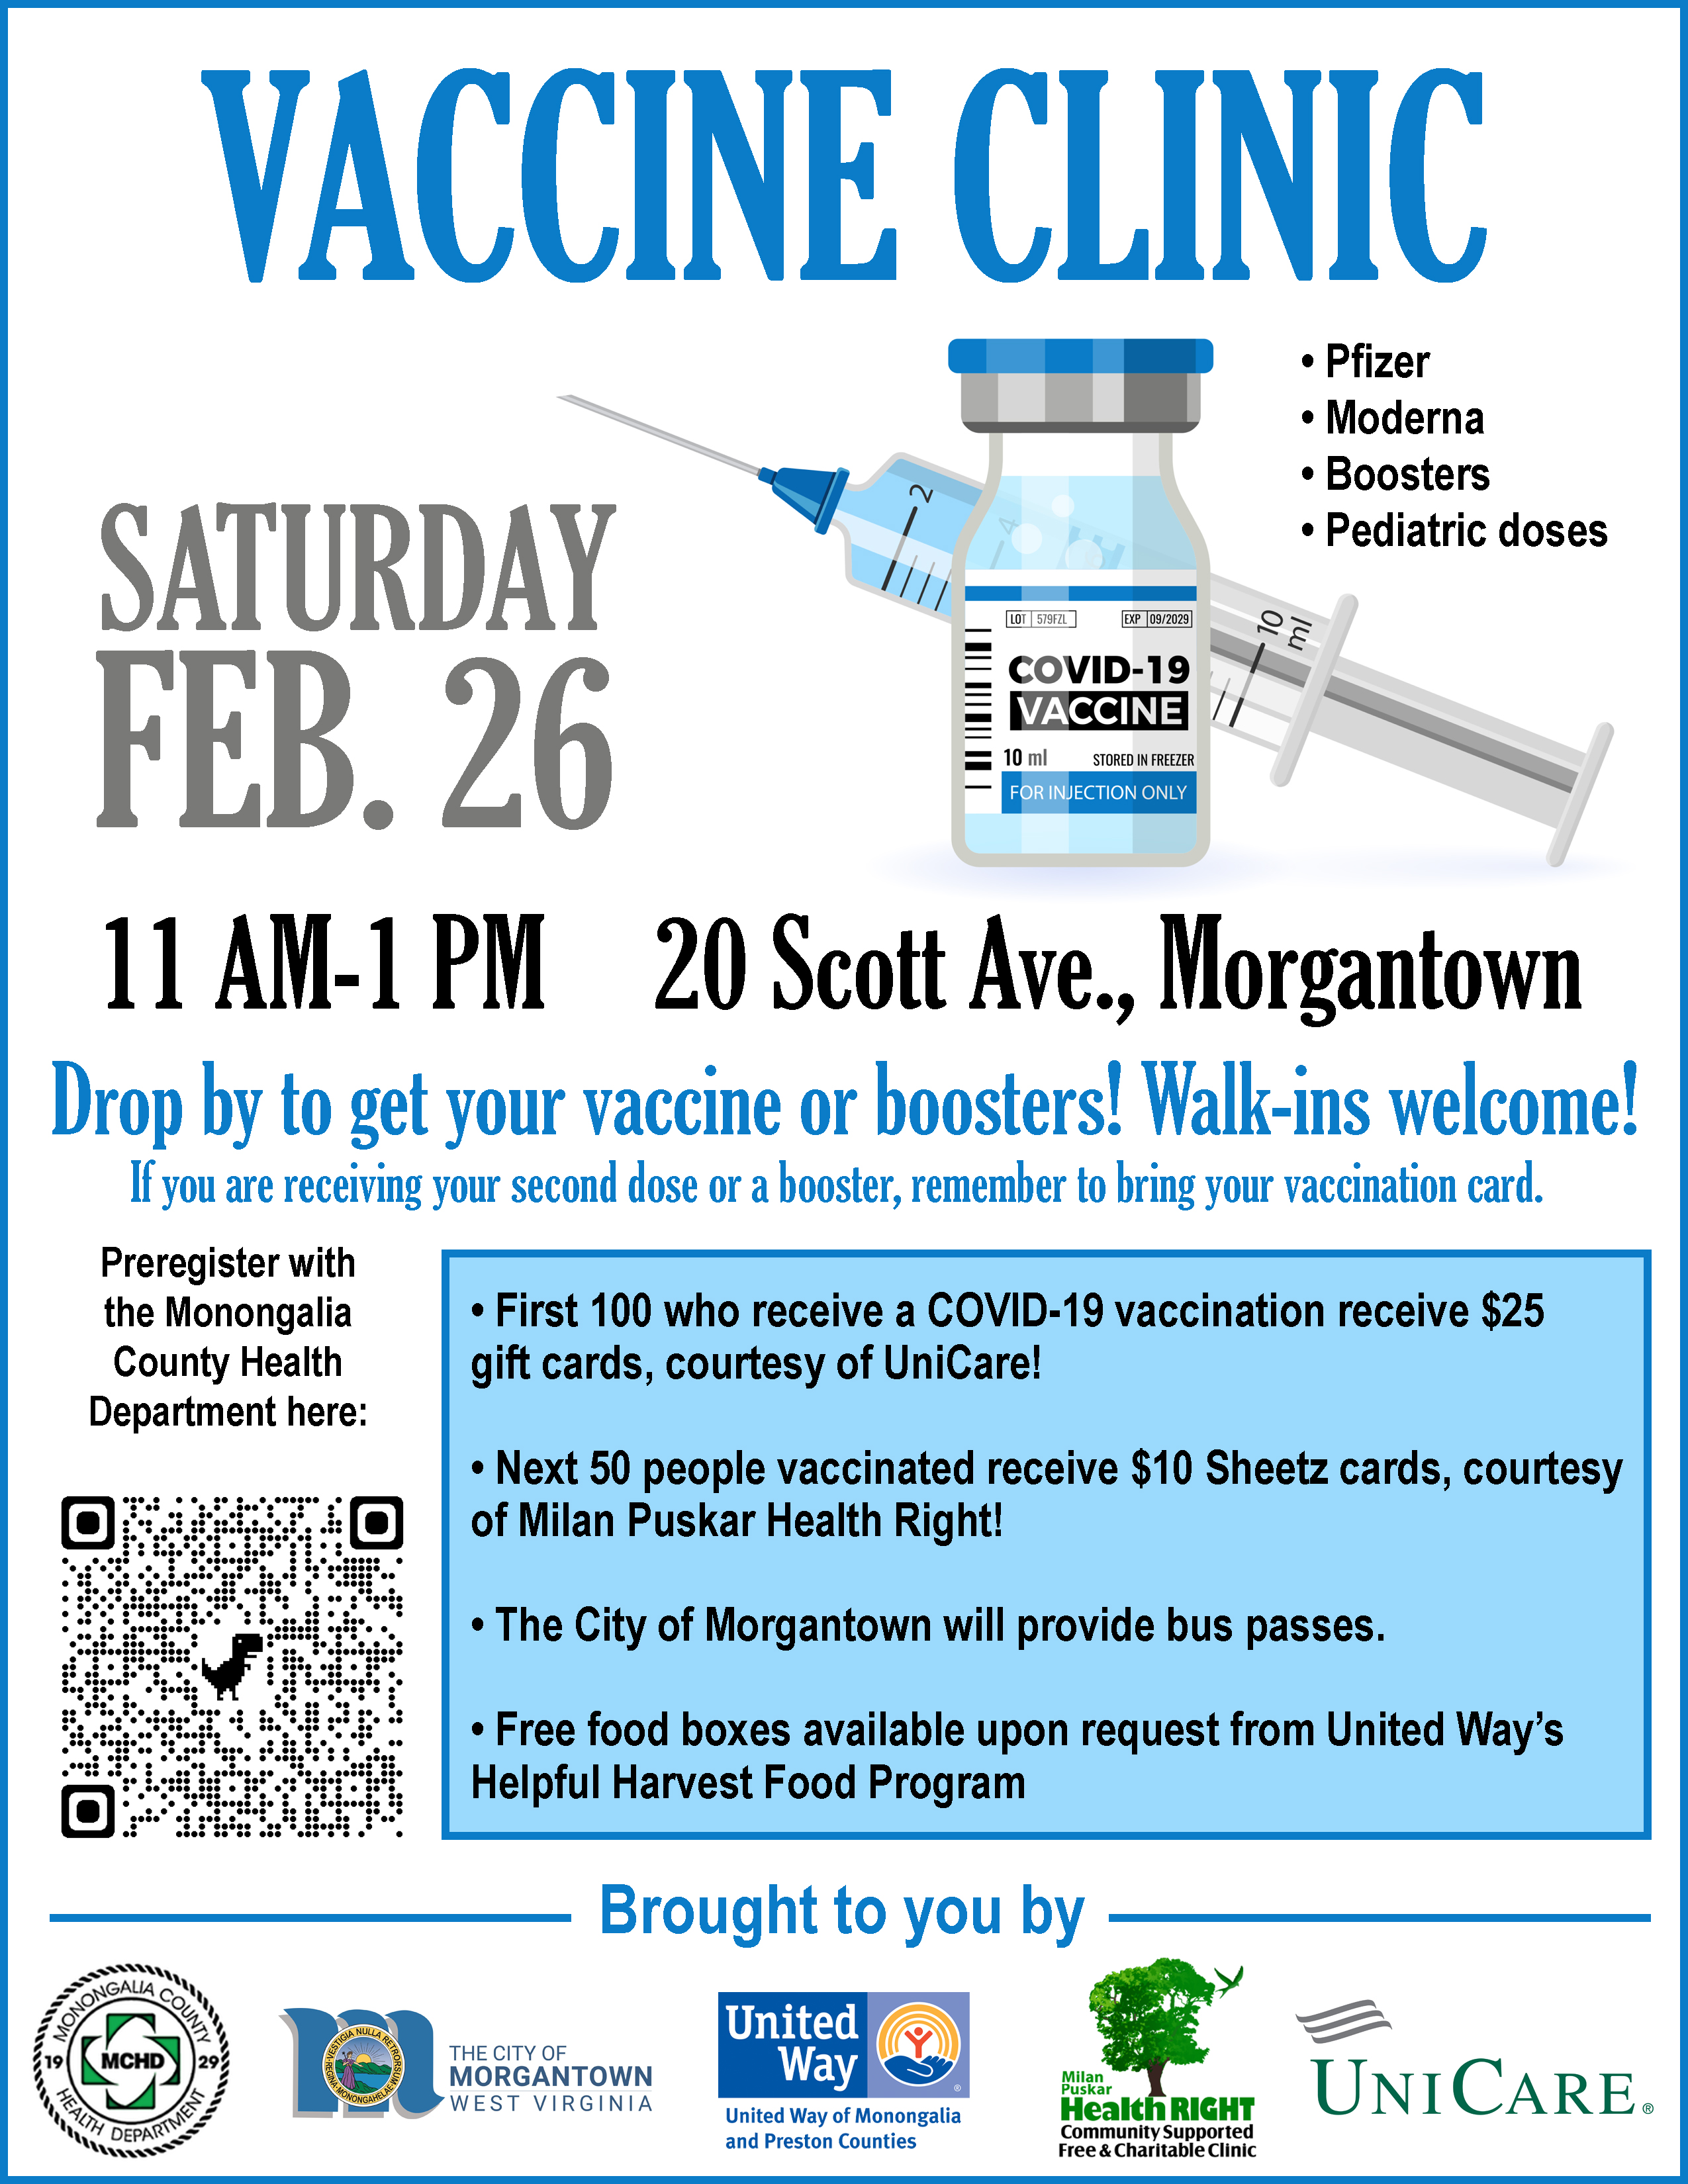 A vaccine clinic will take place on Saturday, Feb. 26.